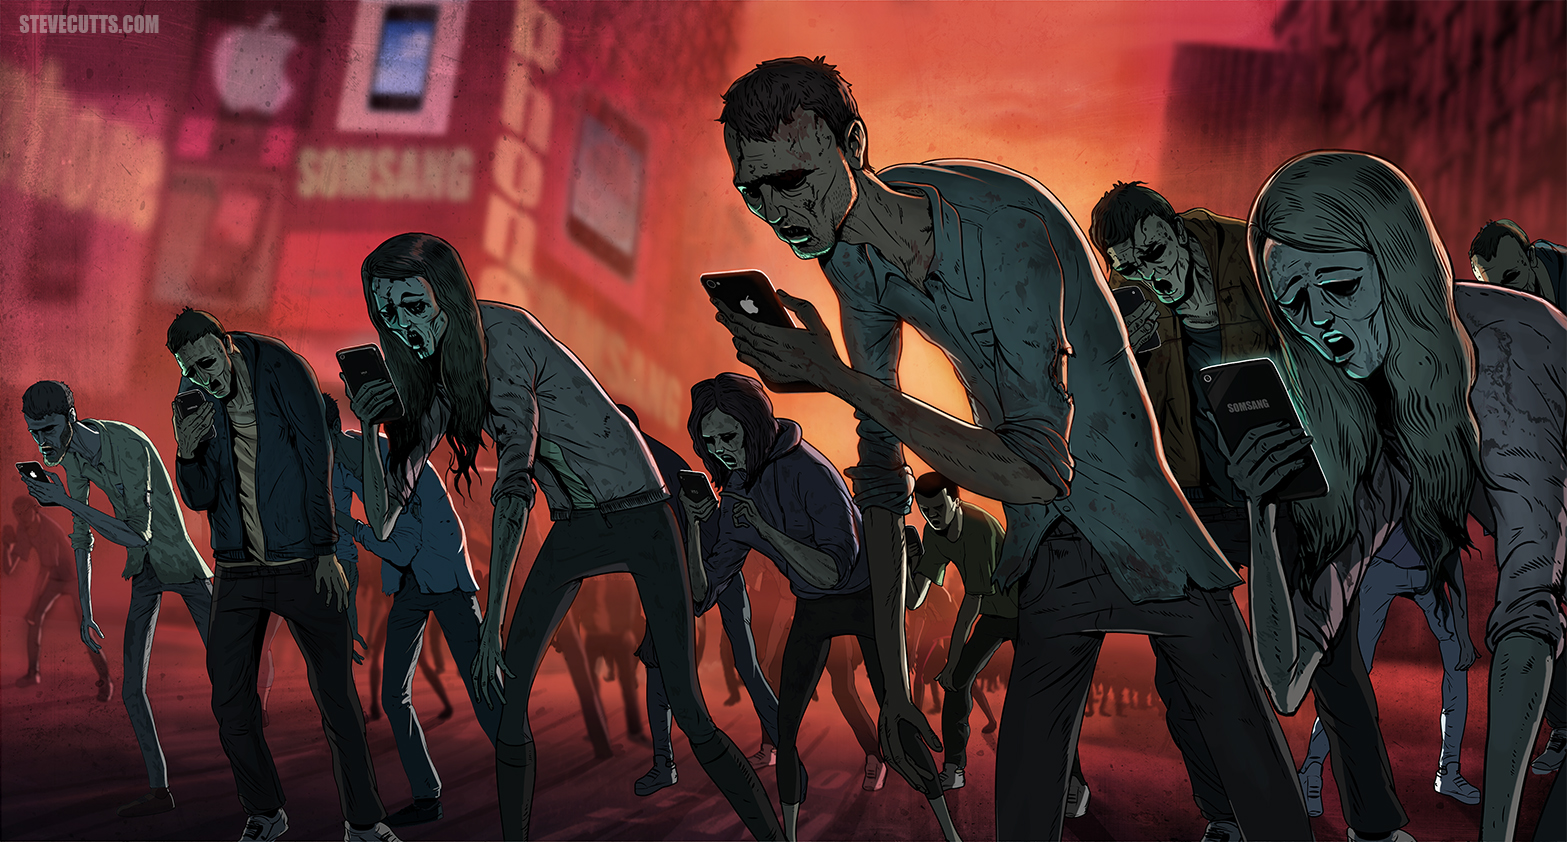 Why be afraid of zombies? Social media already made you one! Find out how social media can turn your whole life upside down.